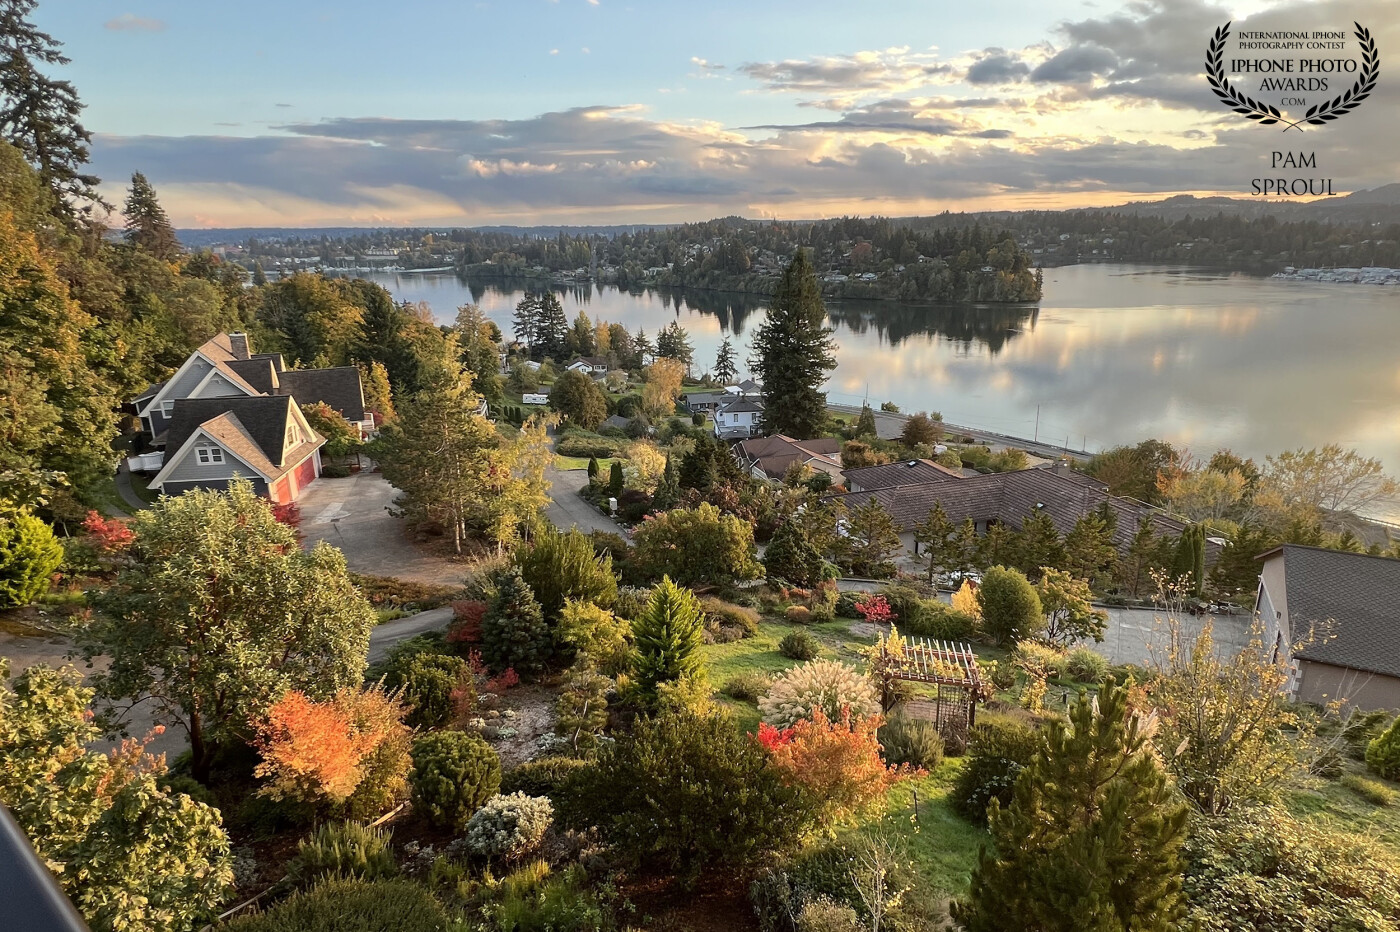 Fall bursting out in magnificent colors over Puget Sound ~ our view from our book club hosts deck.<br />
<br />
“Puget Sound fall glory” - 2023